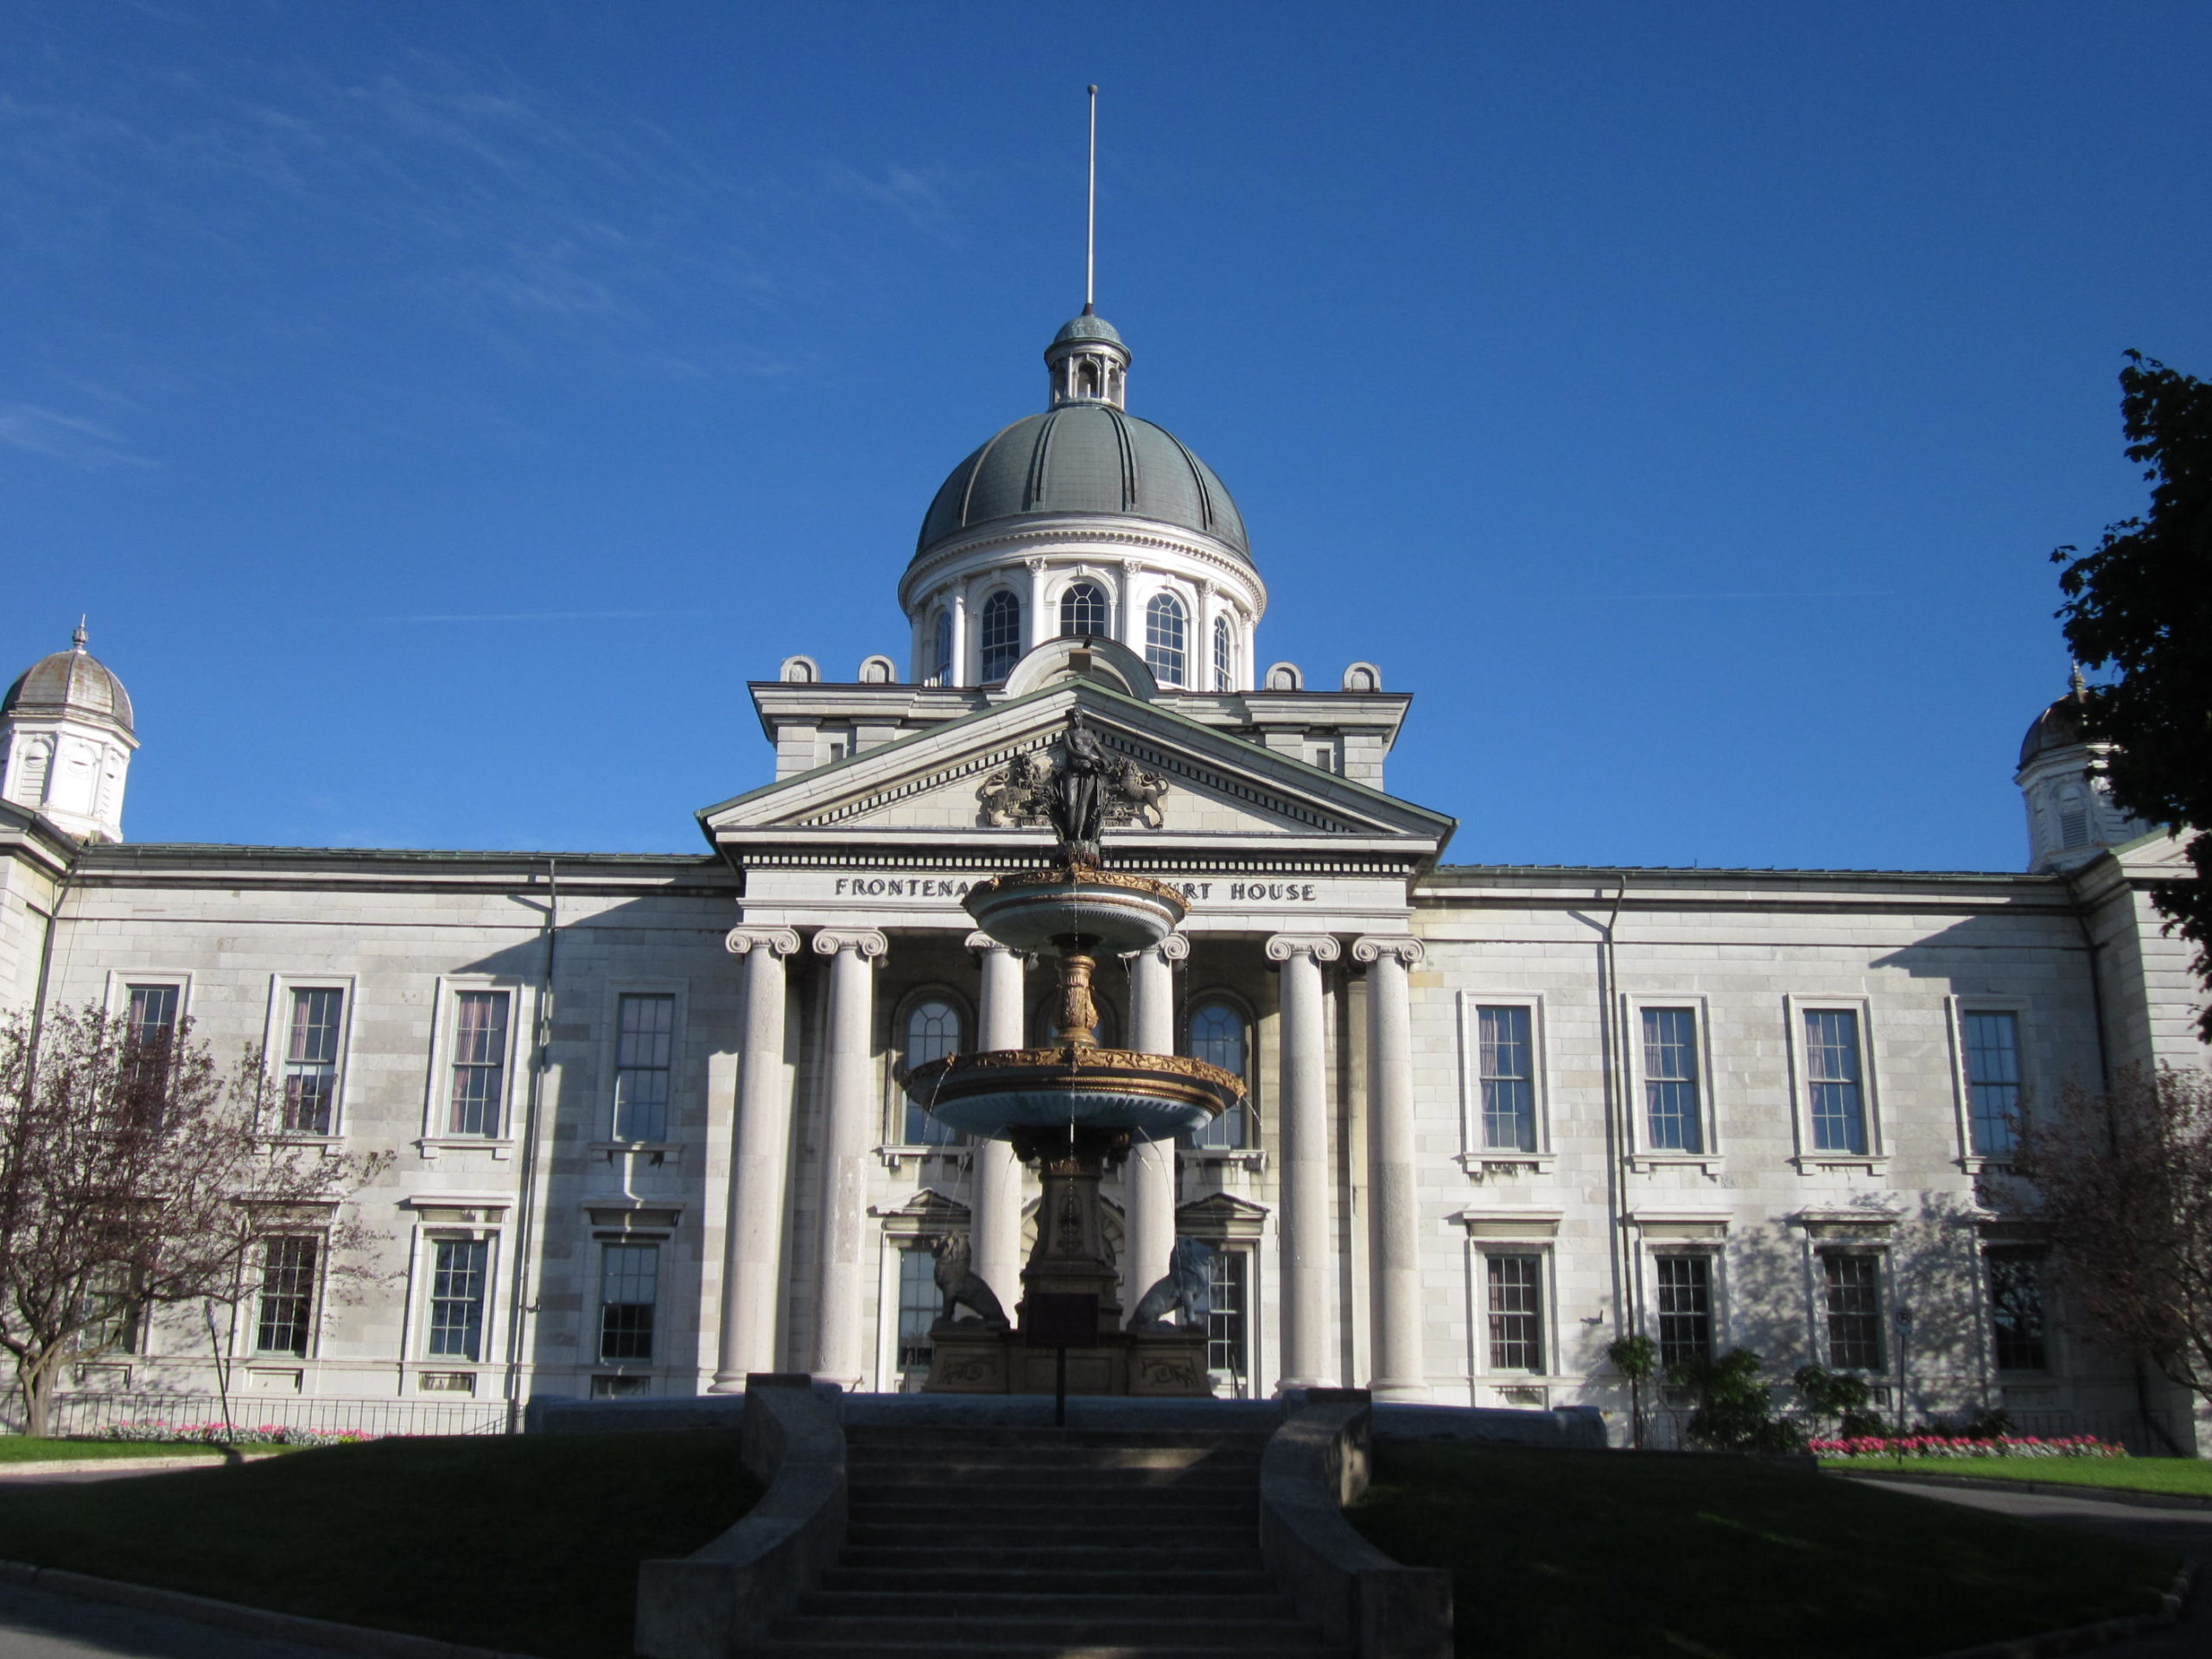 Frontenac county court house in Kingston Ontario